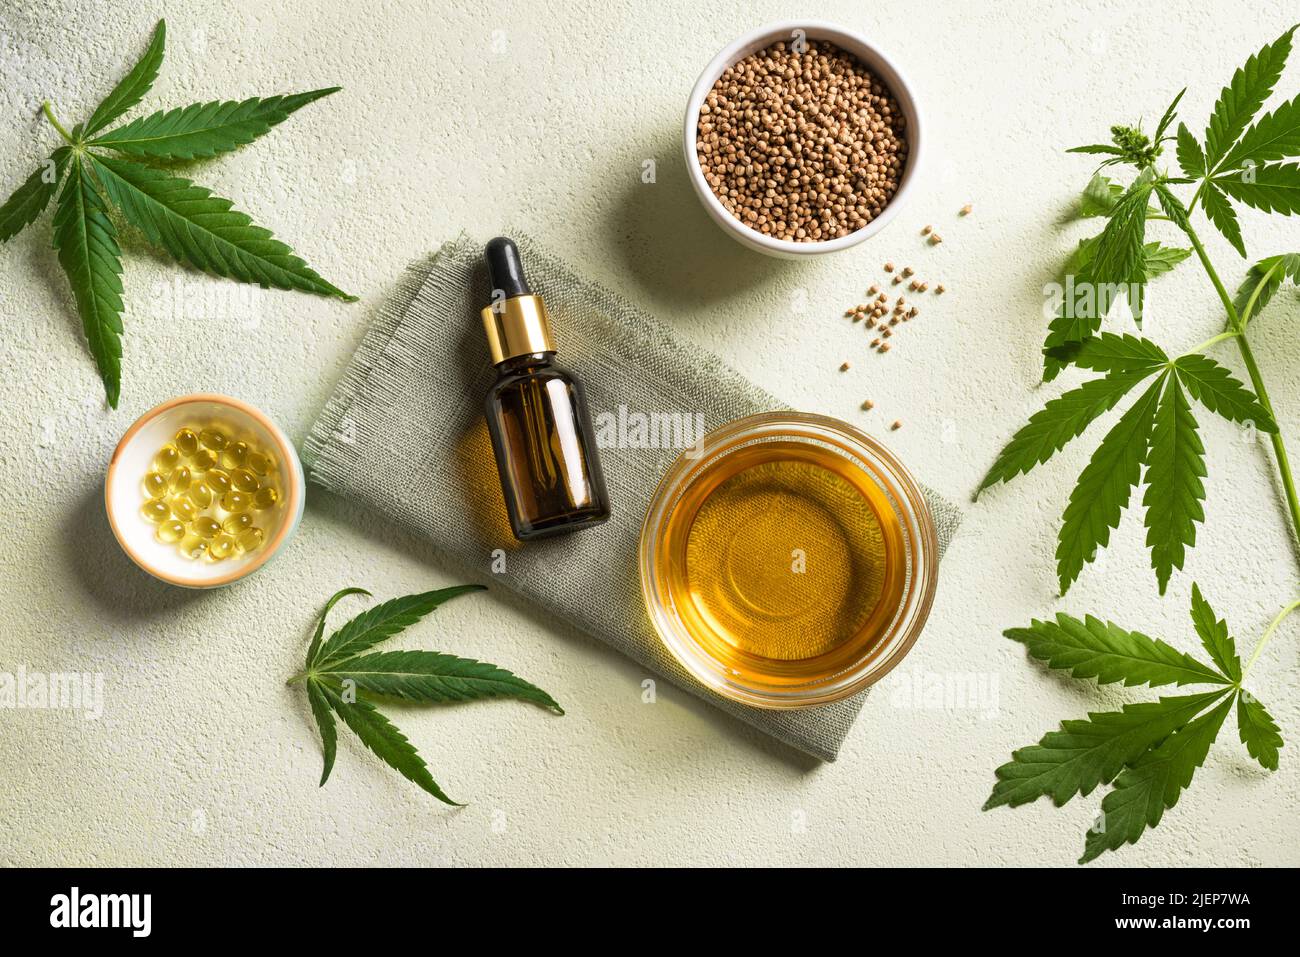 Hemp oil, leaves and seeds, cbd oil in bottle and capsules, alternative medicine and organic skin care concept. Stock Photo